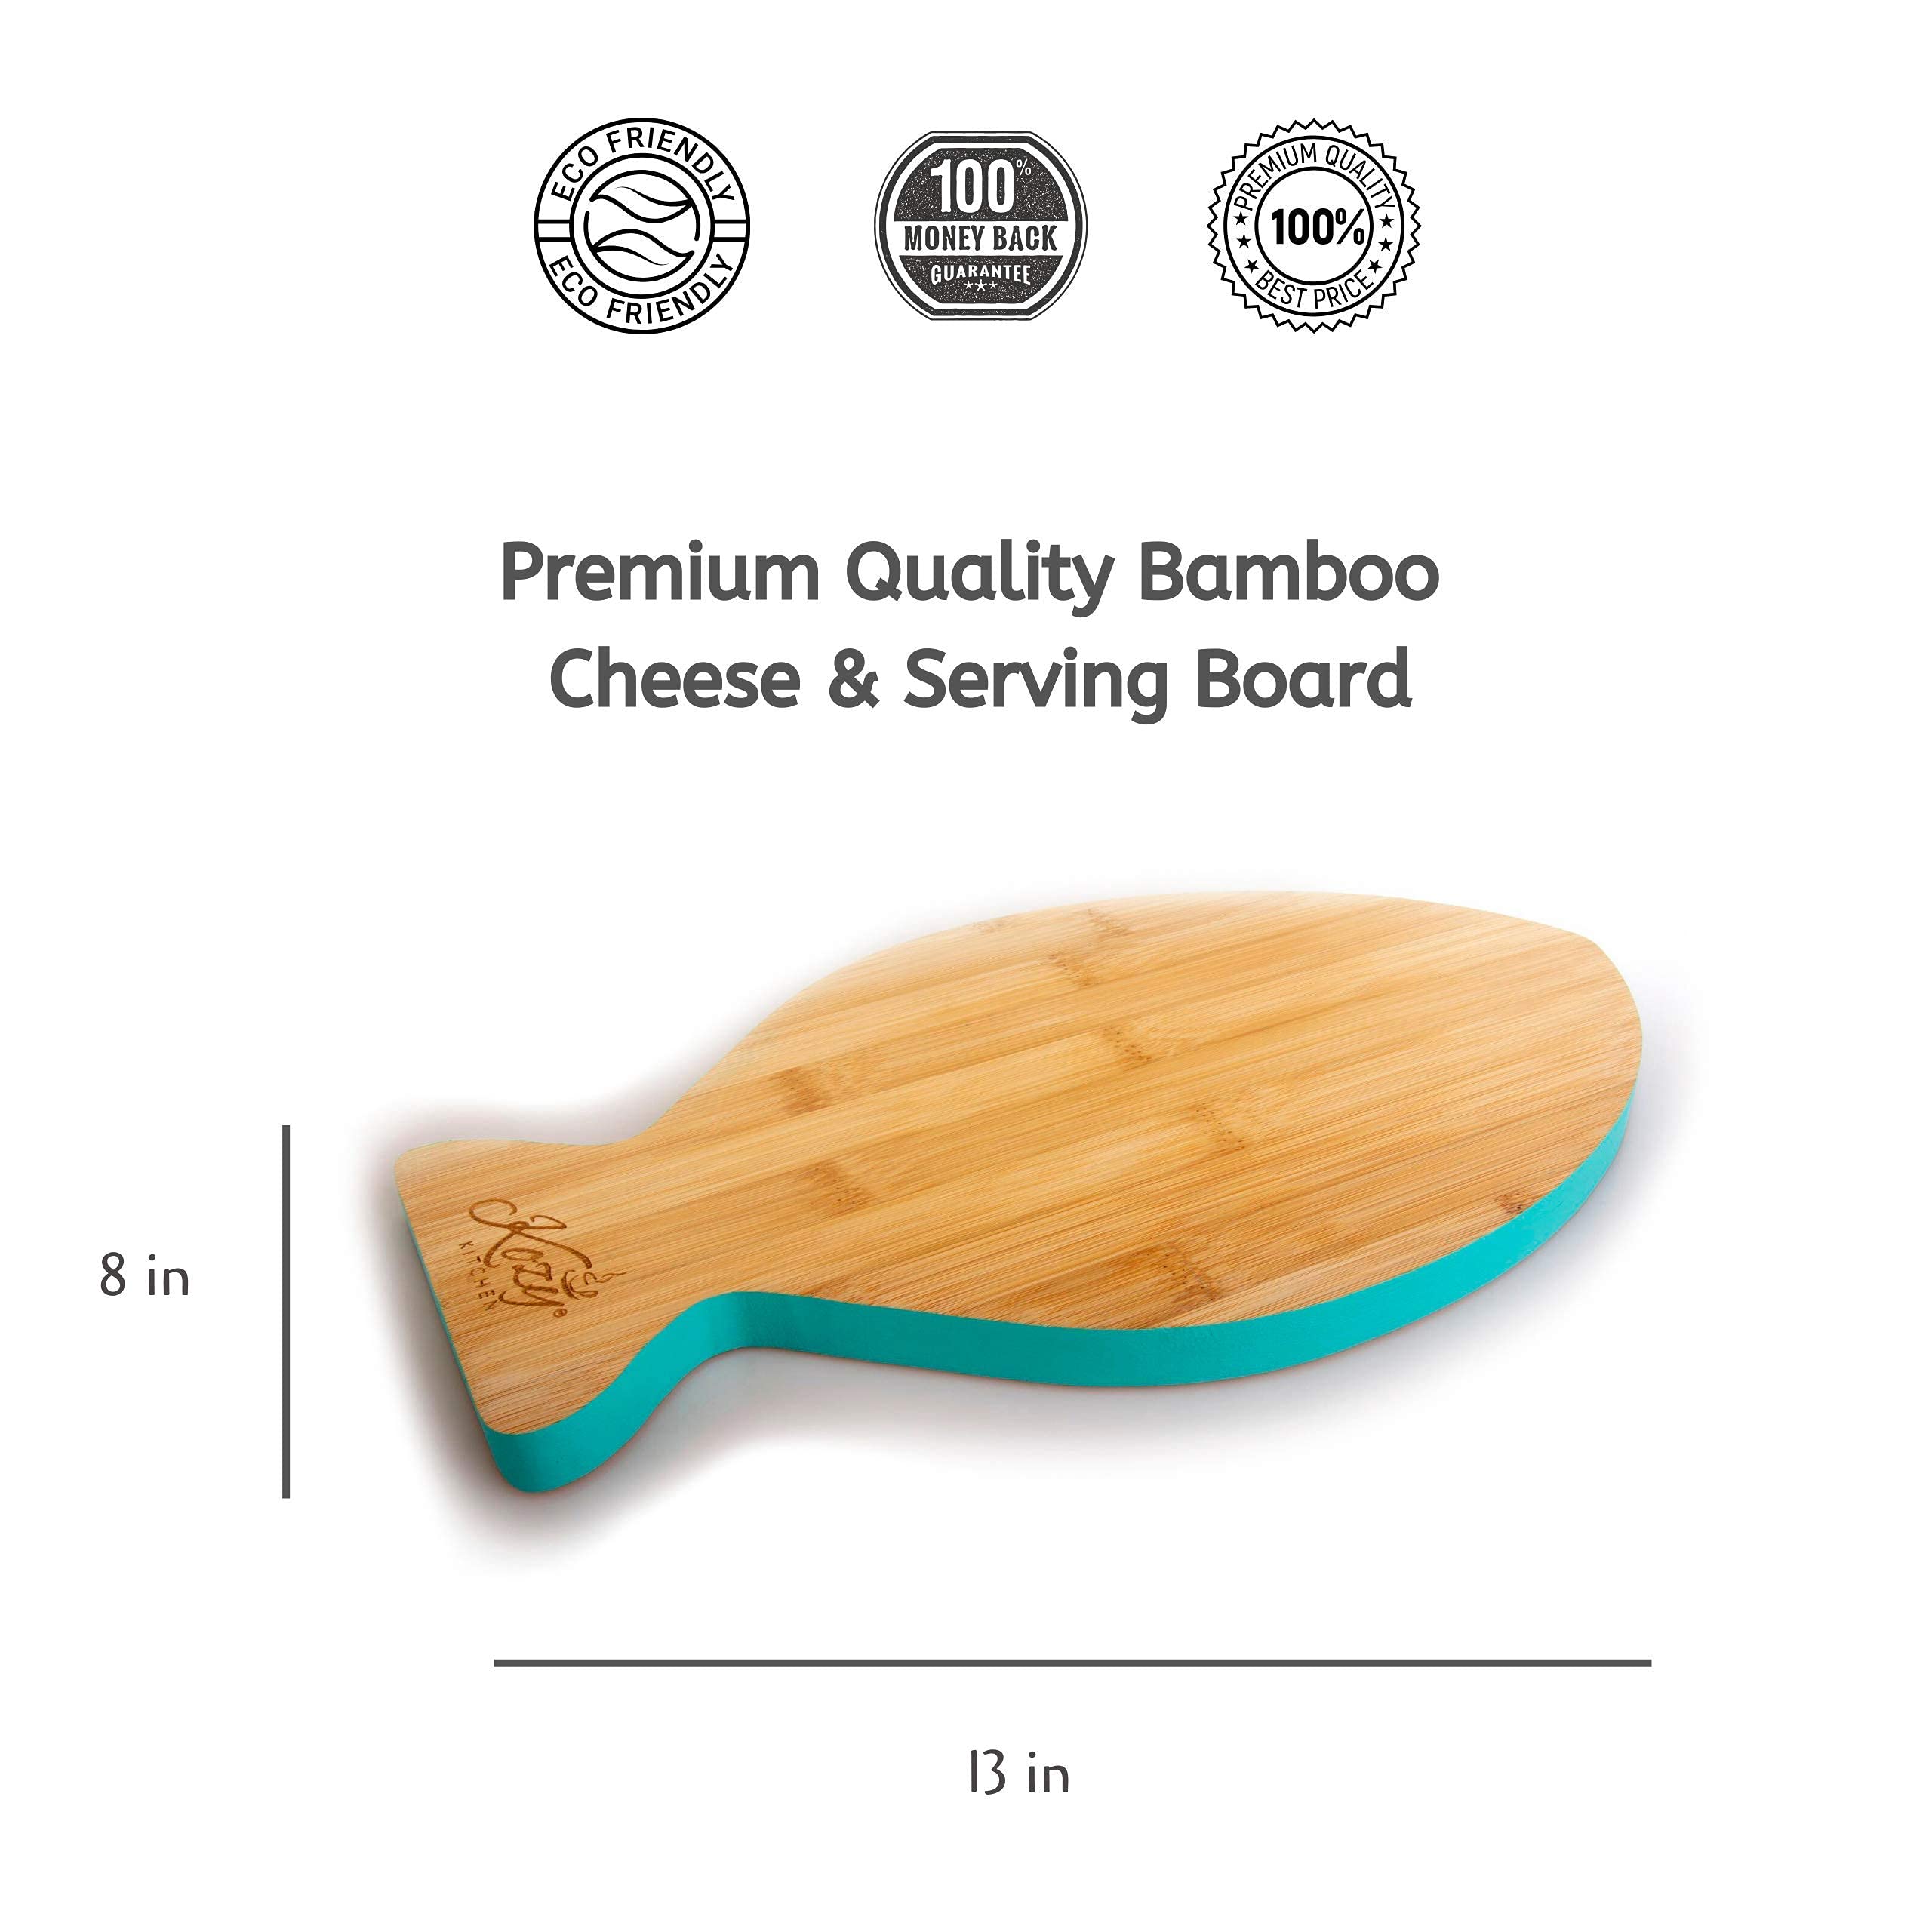 Premium Bamboo Cutting Board, Cheese board, Charcuterie, Serving Platter, By Kozy Kitchen- protective, Stylish, Eco-friendly Great for Parties